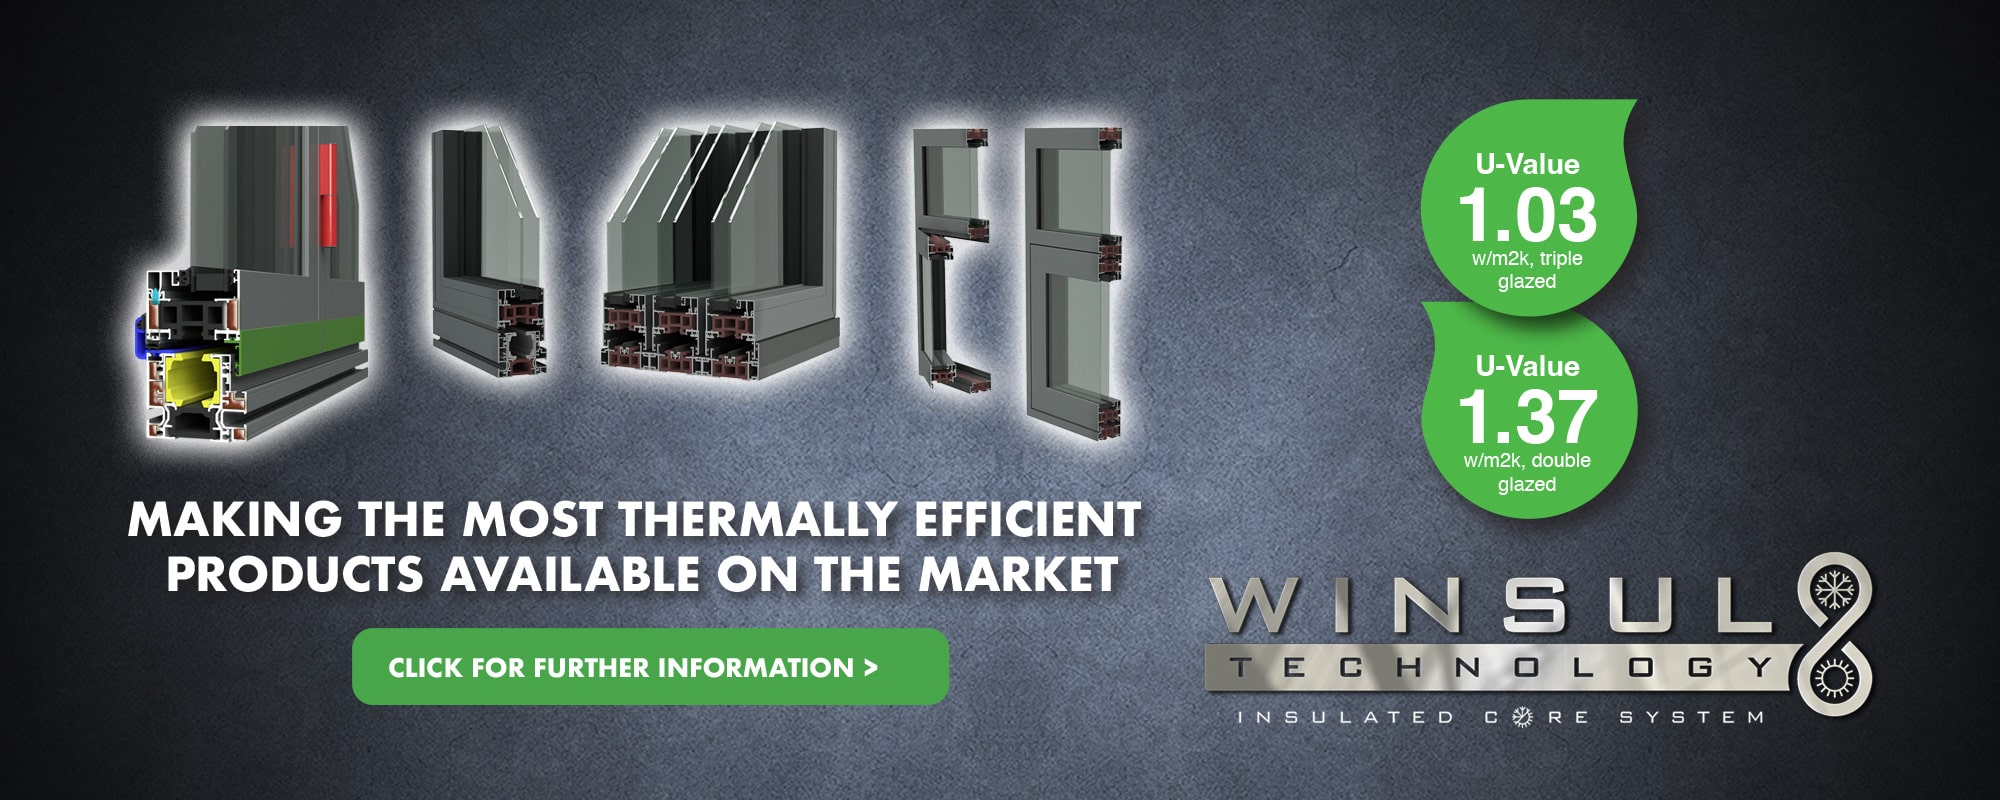 WINSUL Technology - making the most thermally efficient products available on the market